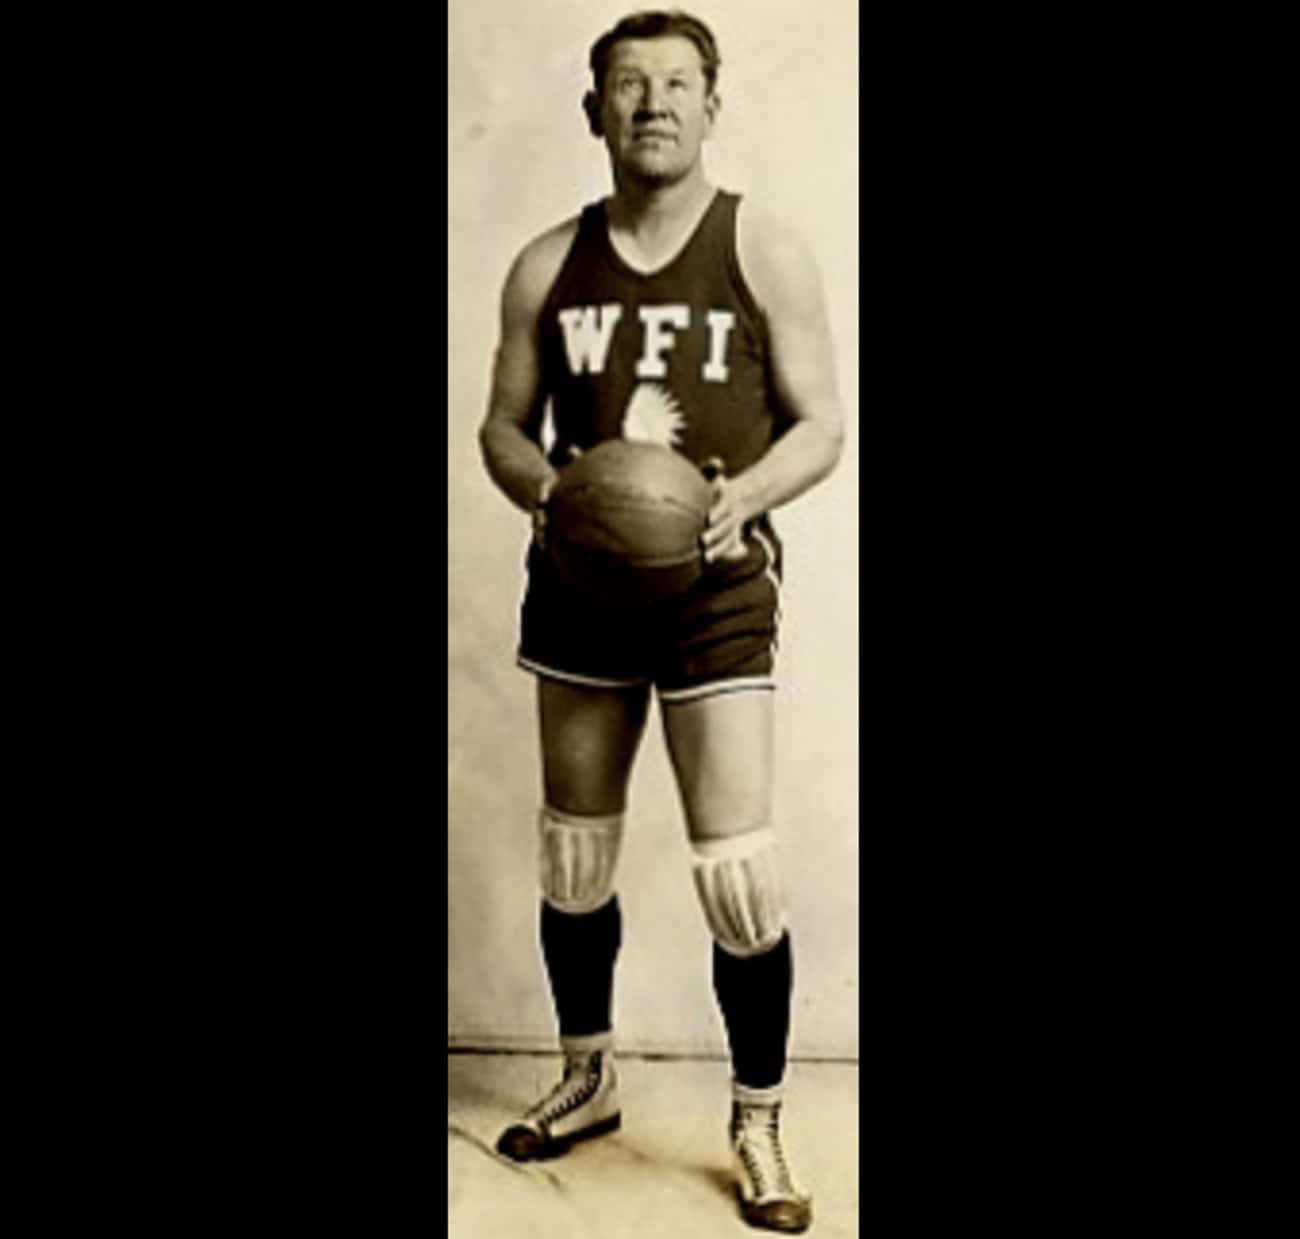 Thorpe Played On A Traveling Native American Basketball Team